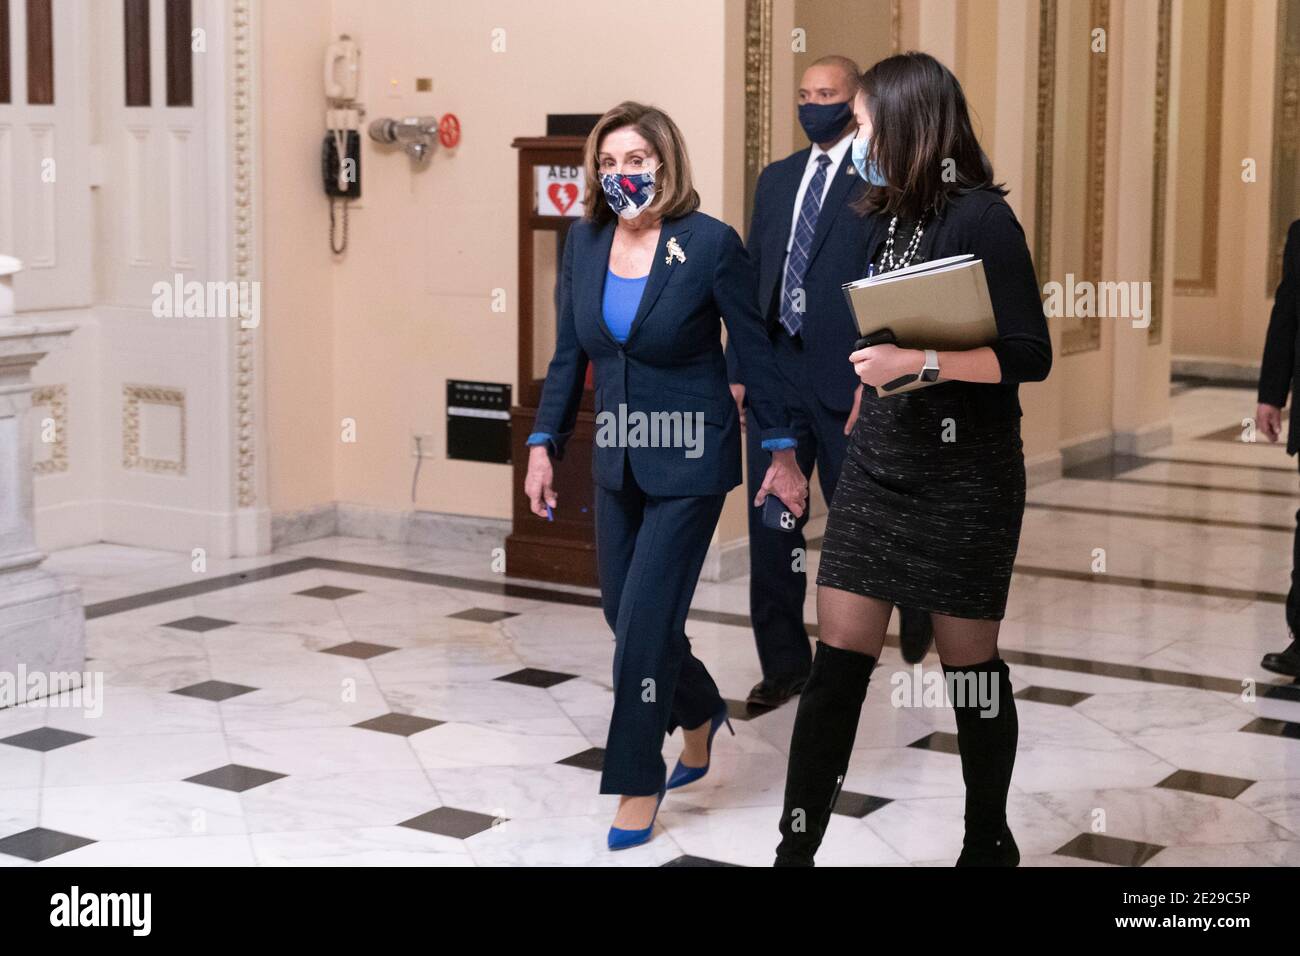 Washington DC- Speaker of the, United States. 12th Jan, 2021. House of  Representatives Nancy Pelosi walks from the House Chamber after holding  votes on the removal of President Trump form office. Photo